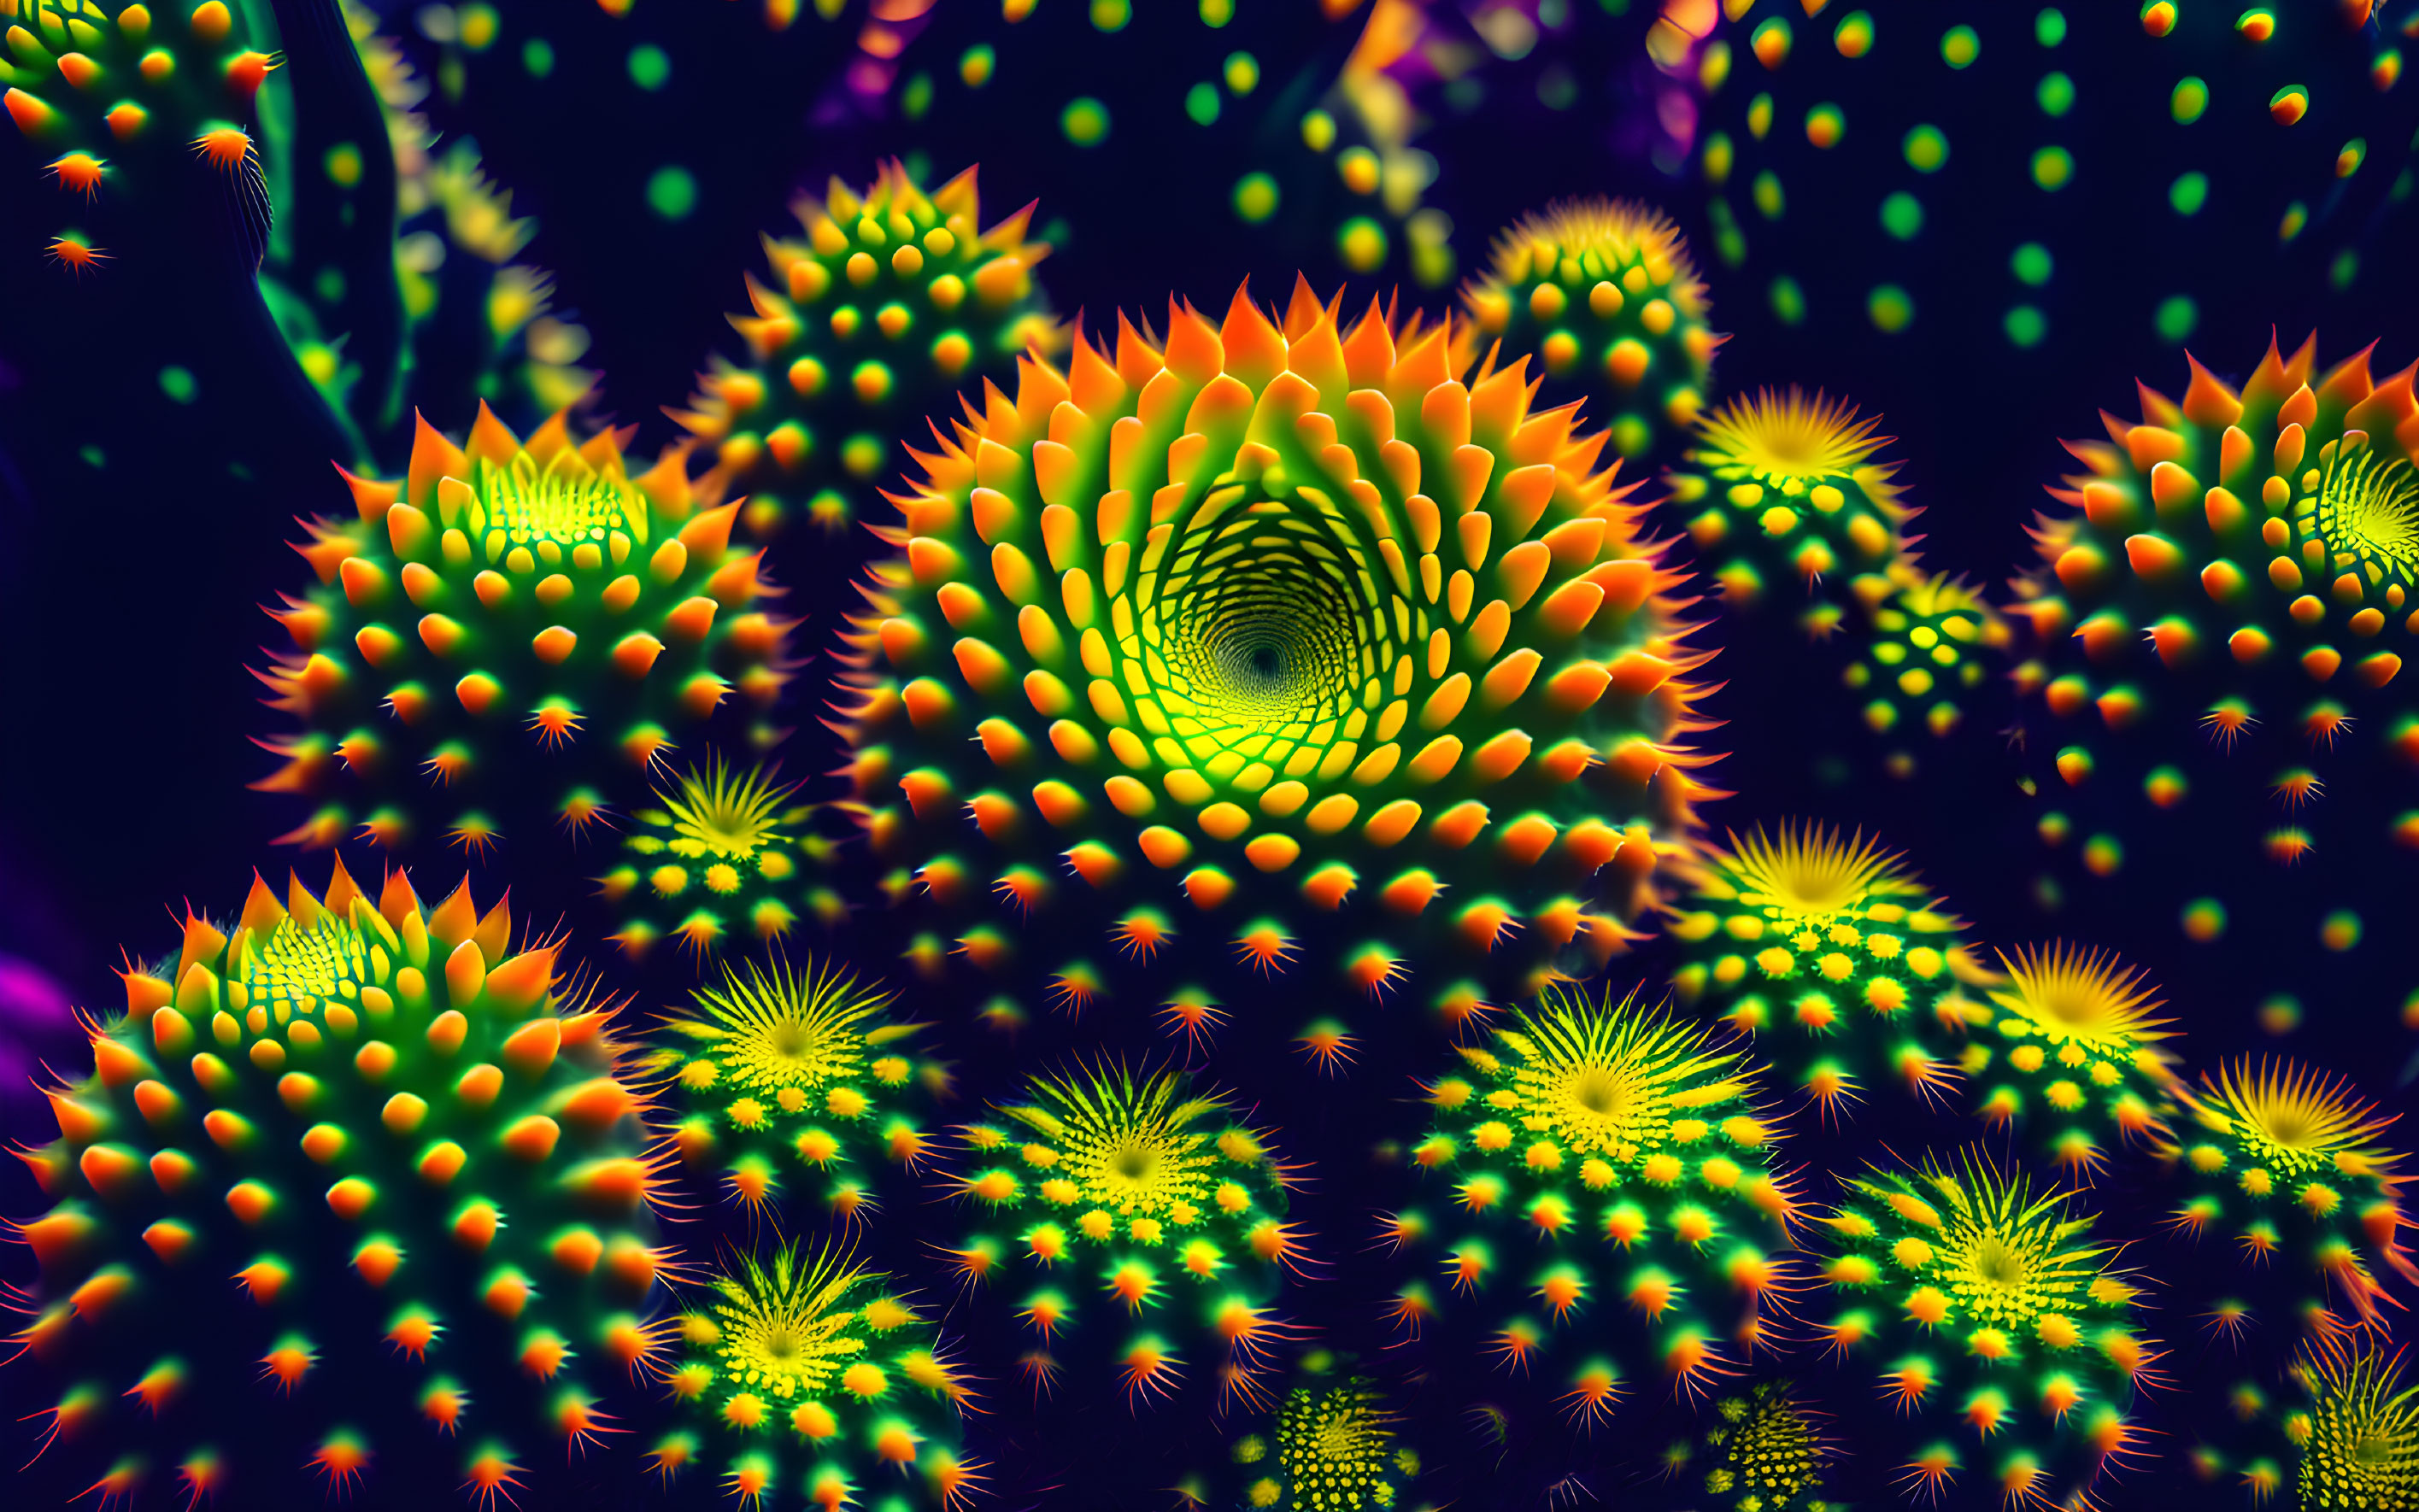 Colorful neon spiral patterns on cactus shapes with floating orbs.